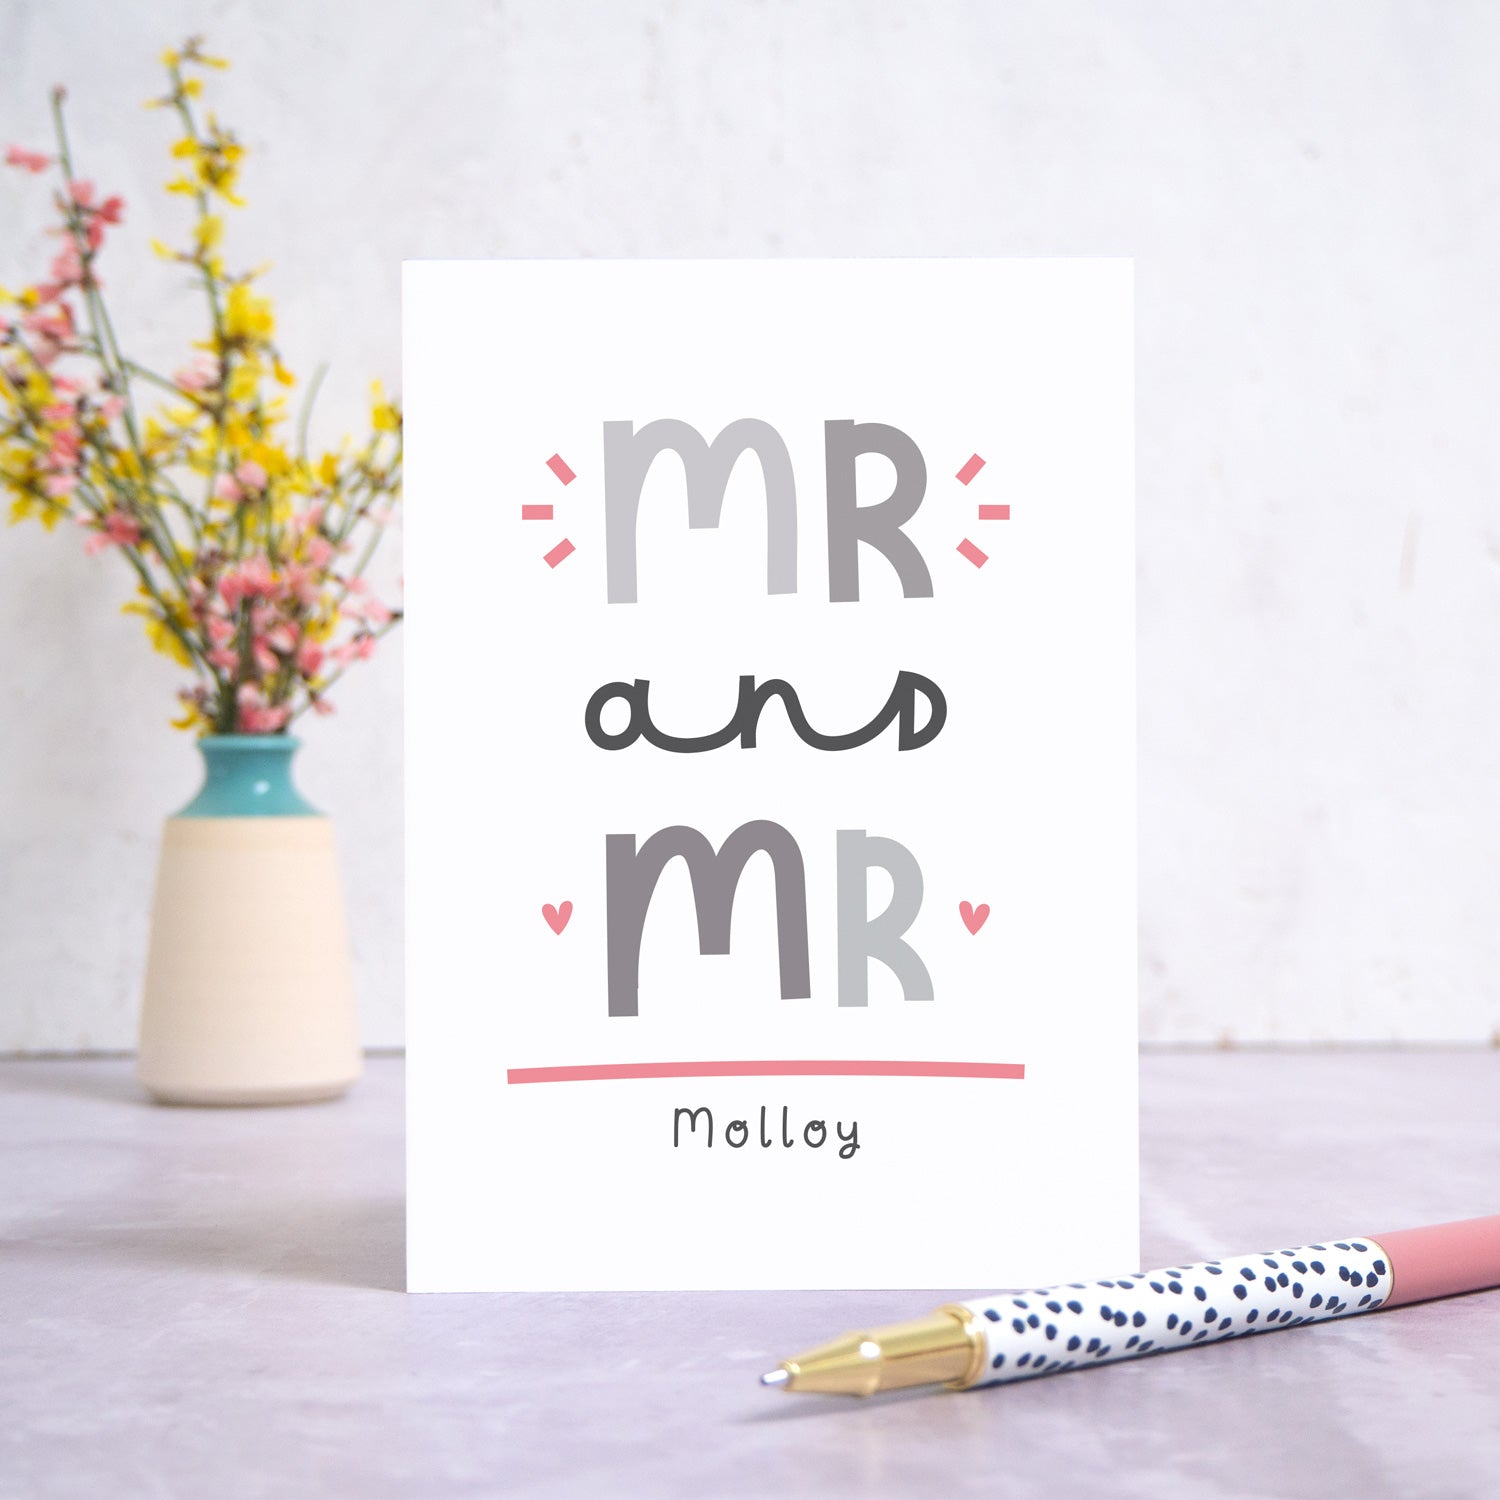 A Mr and Mr personalised wedding congratulations card stood in front of a white background and a small vase of yellow and pink flowers. There is a white and black spotty pen in the foreground. This is the grey and pink version of the card.